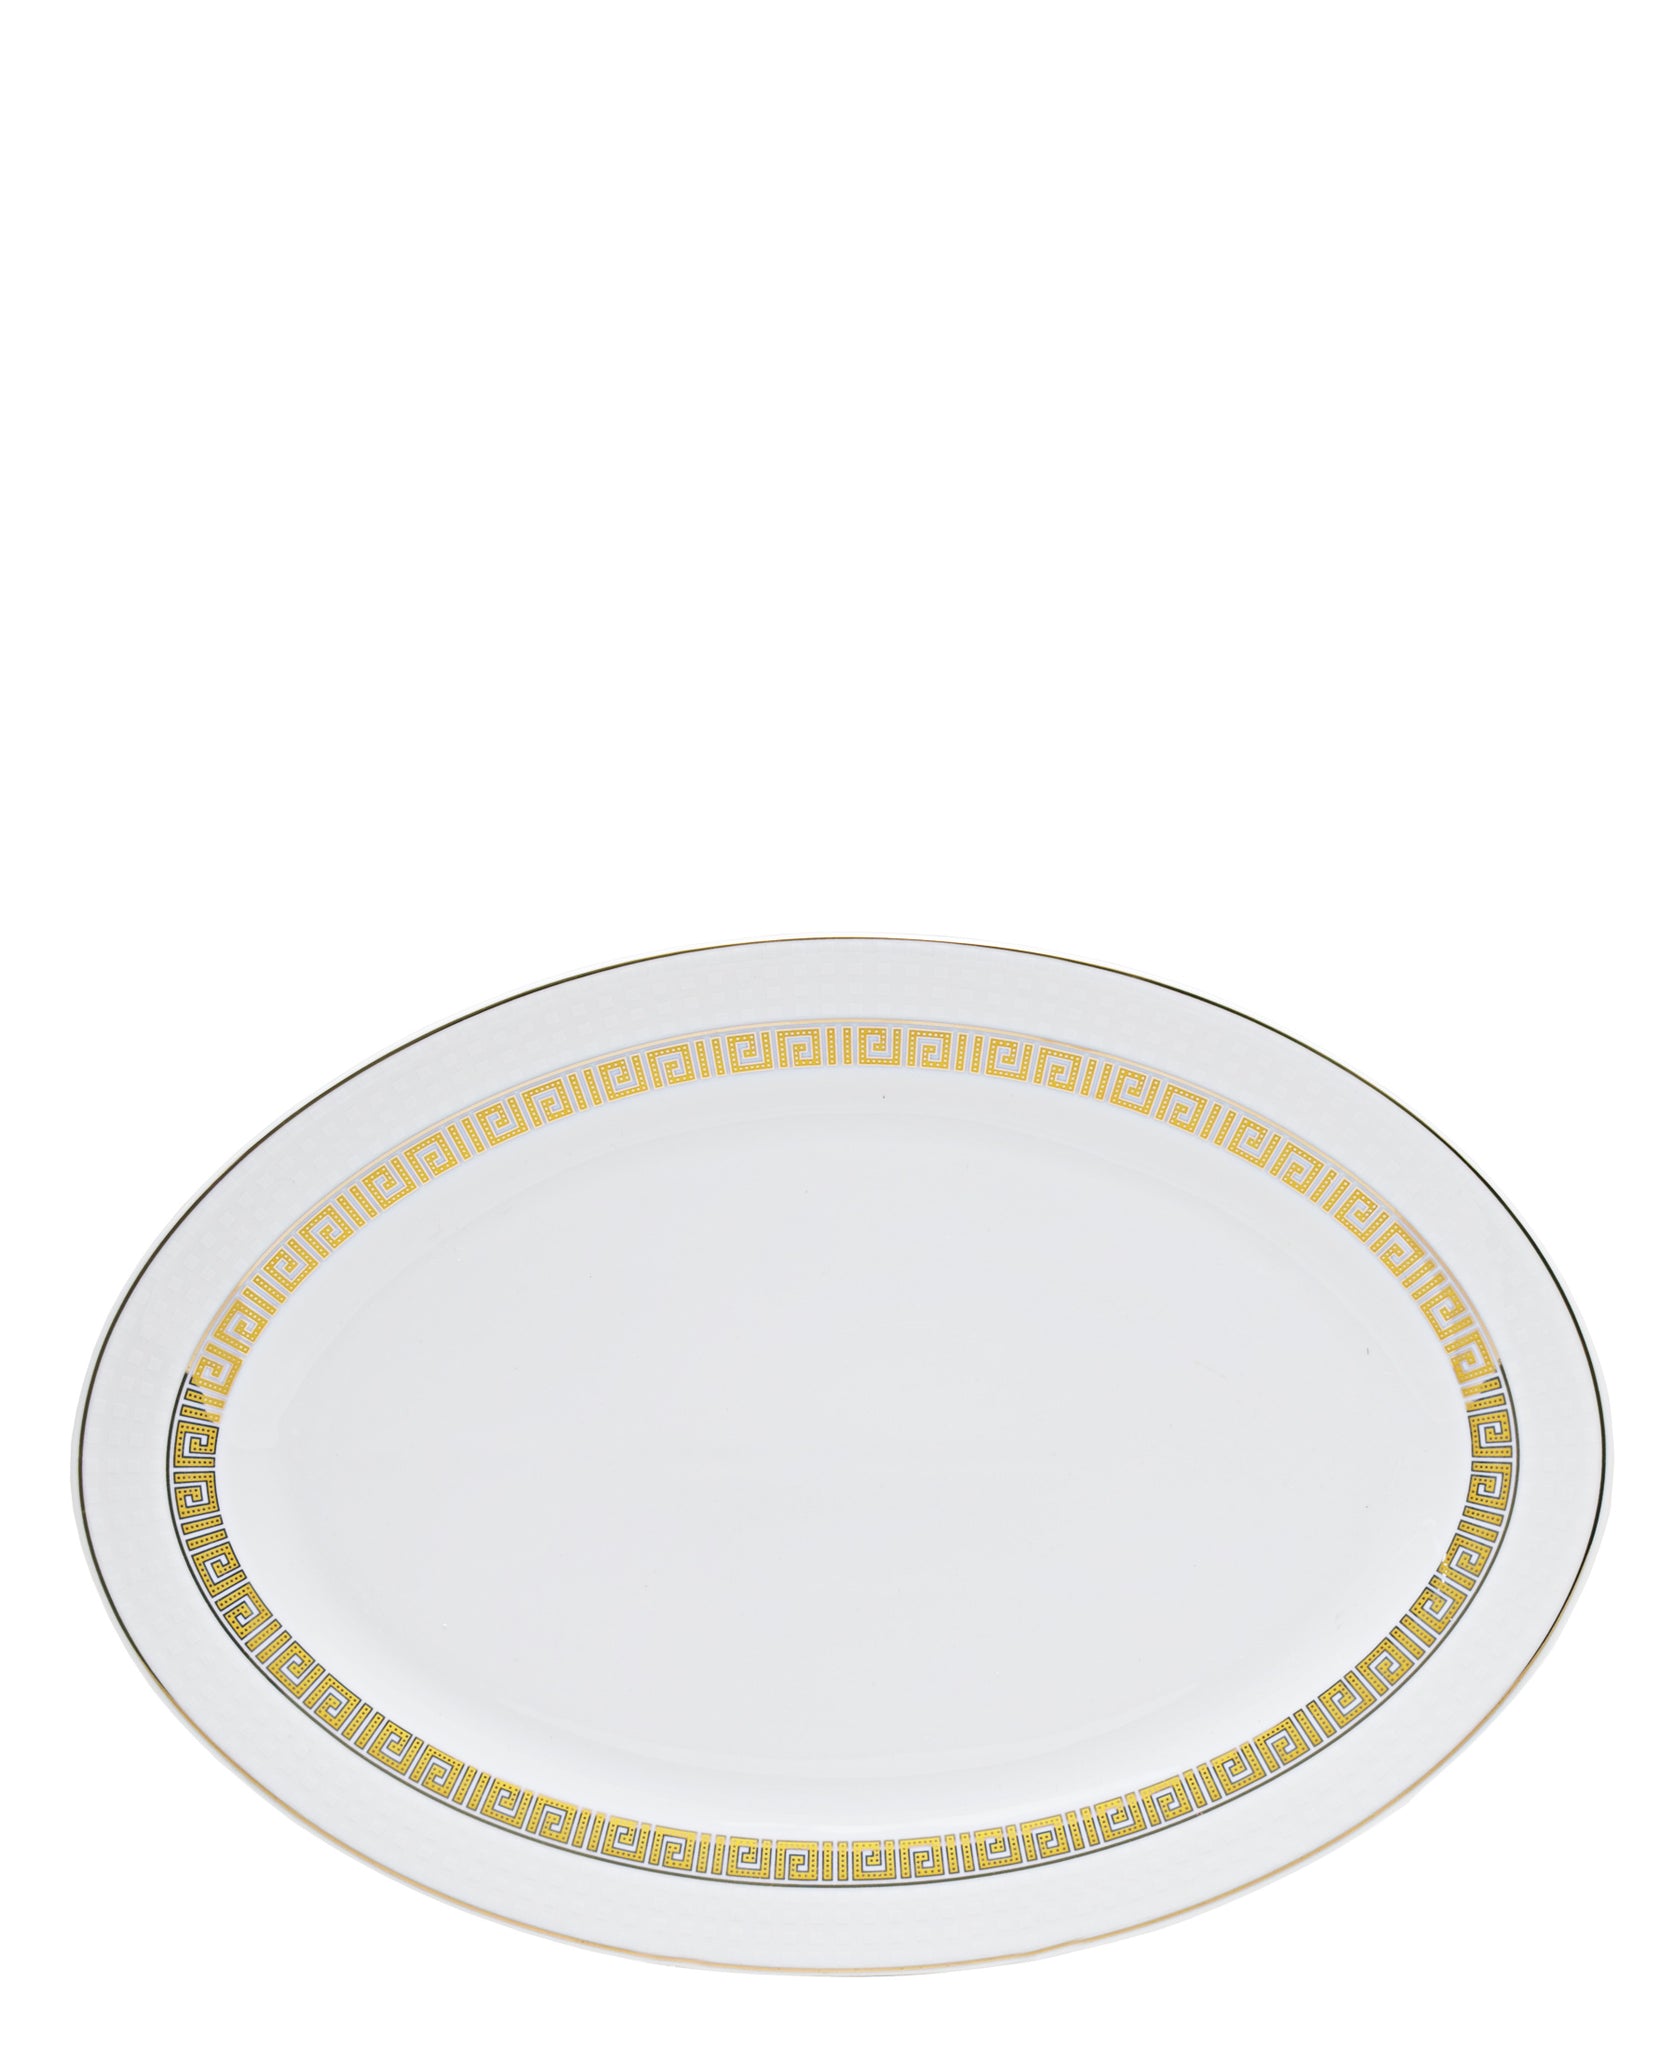 Table Pride 47 Piece Dinner Set - White With Gold Rim